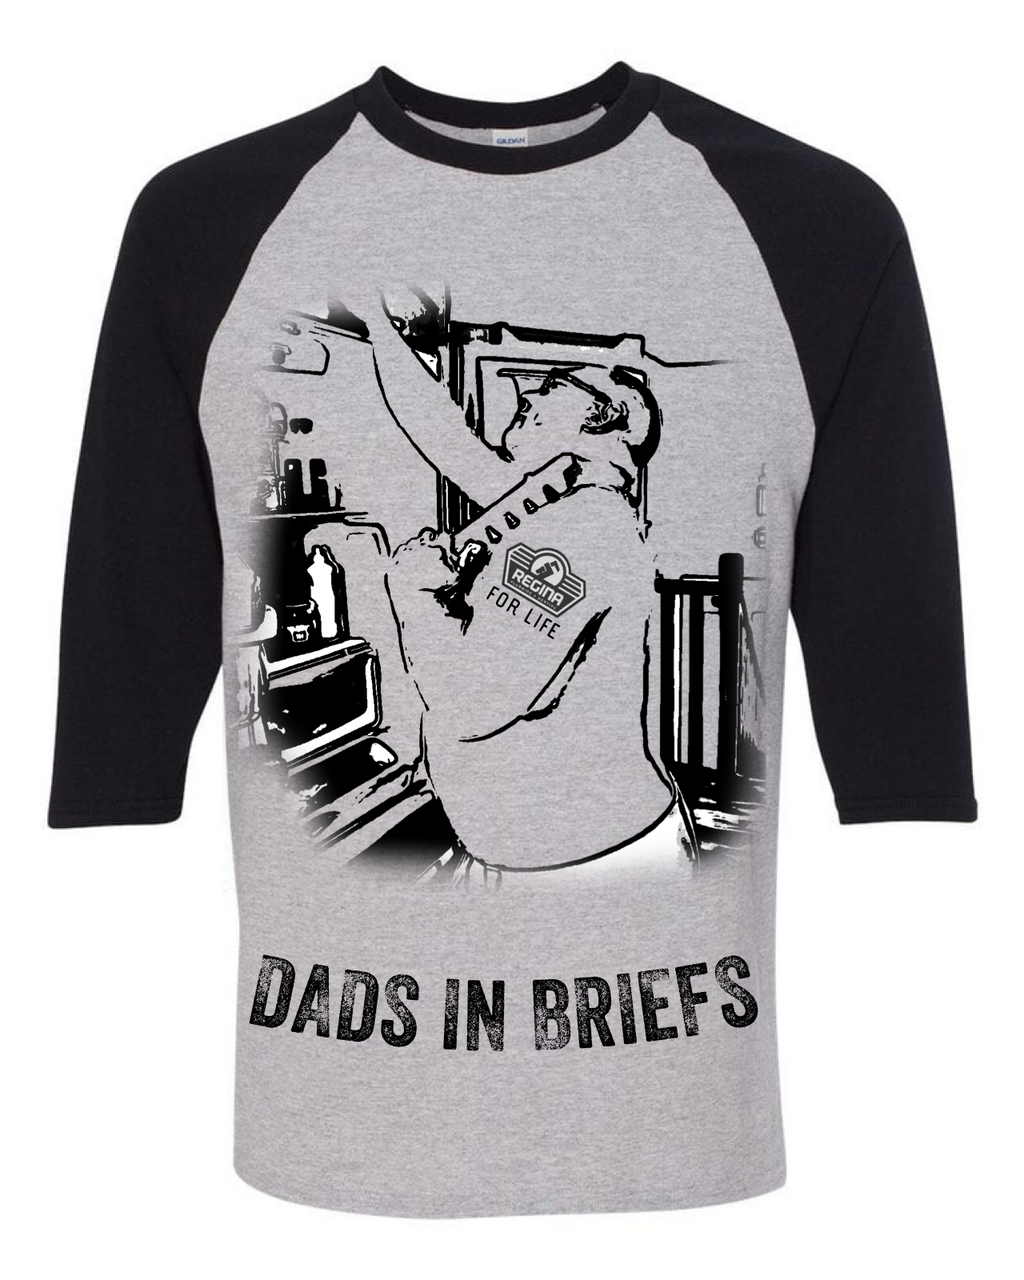 Schaffer Shirt - Dads In Briefs NOW AVAILABLE!